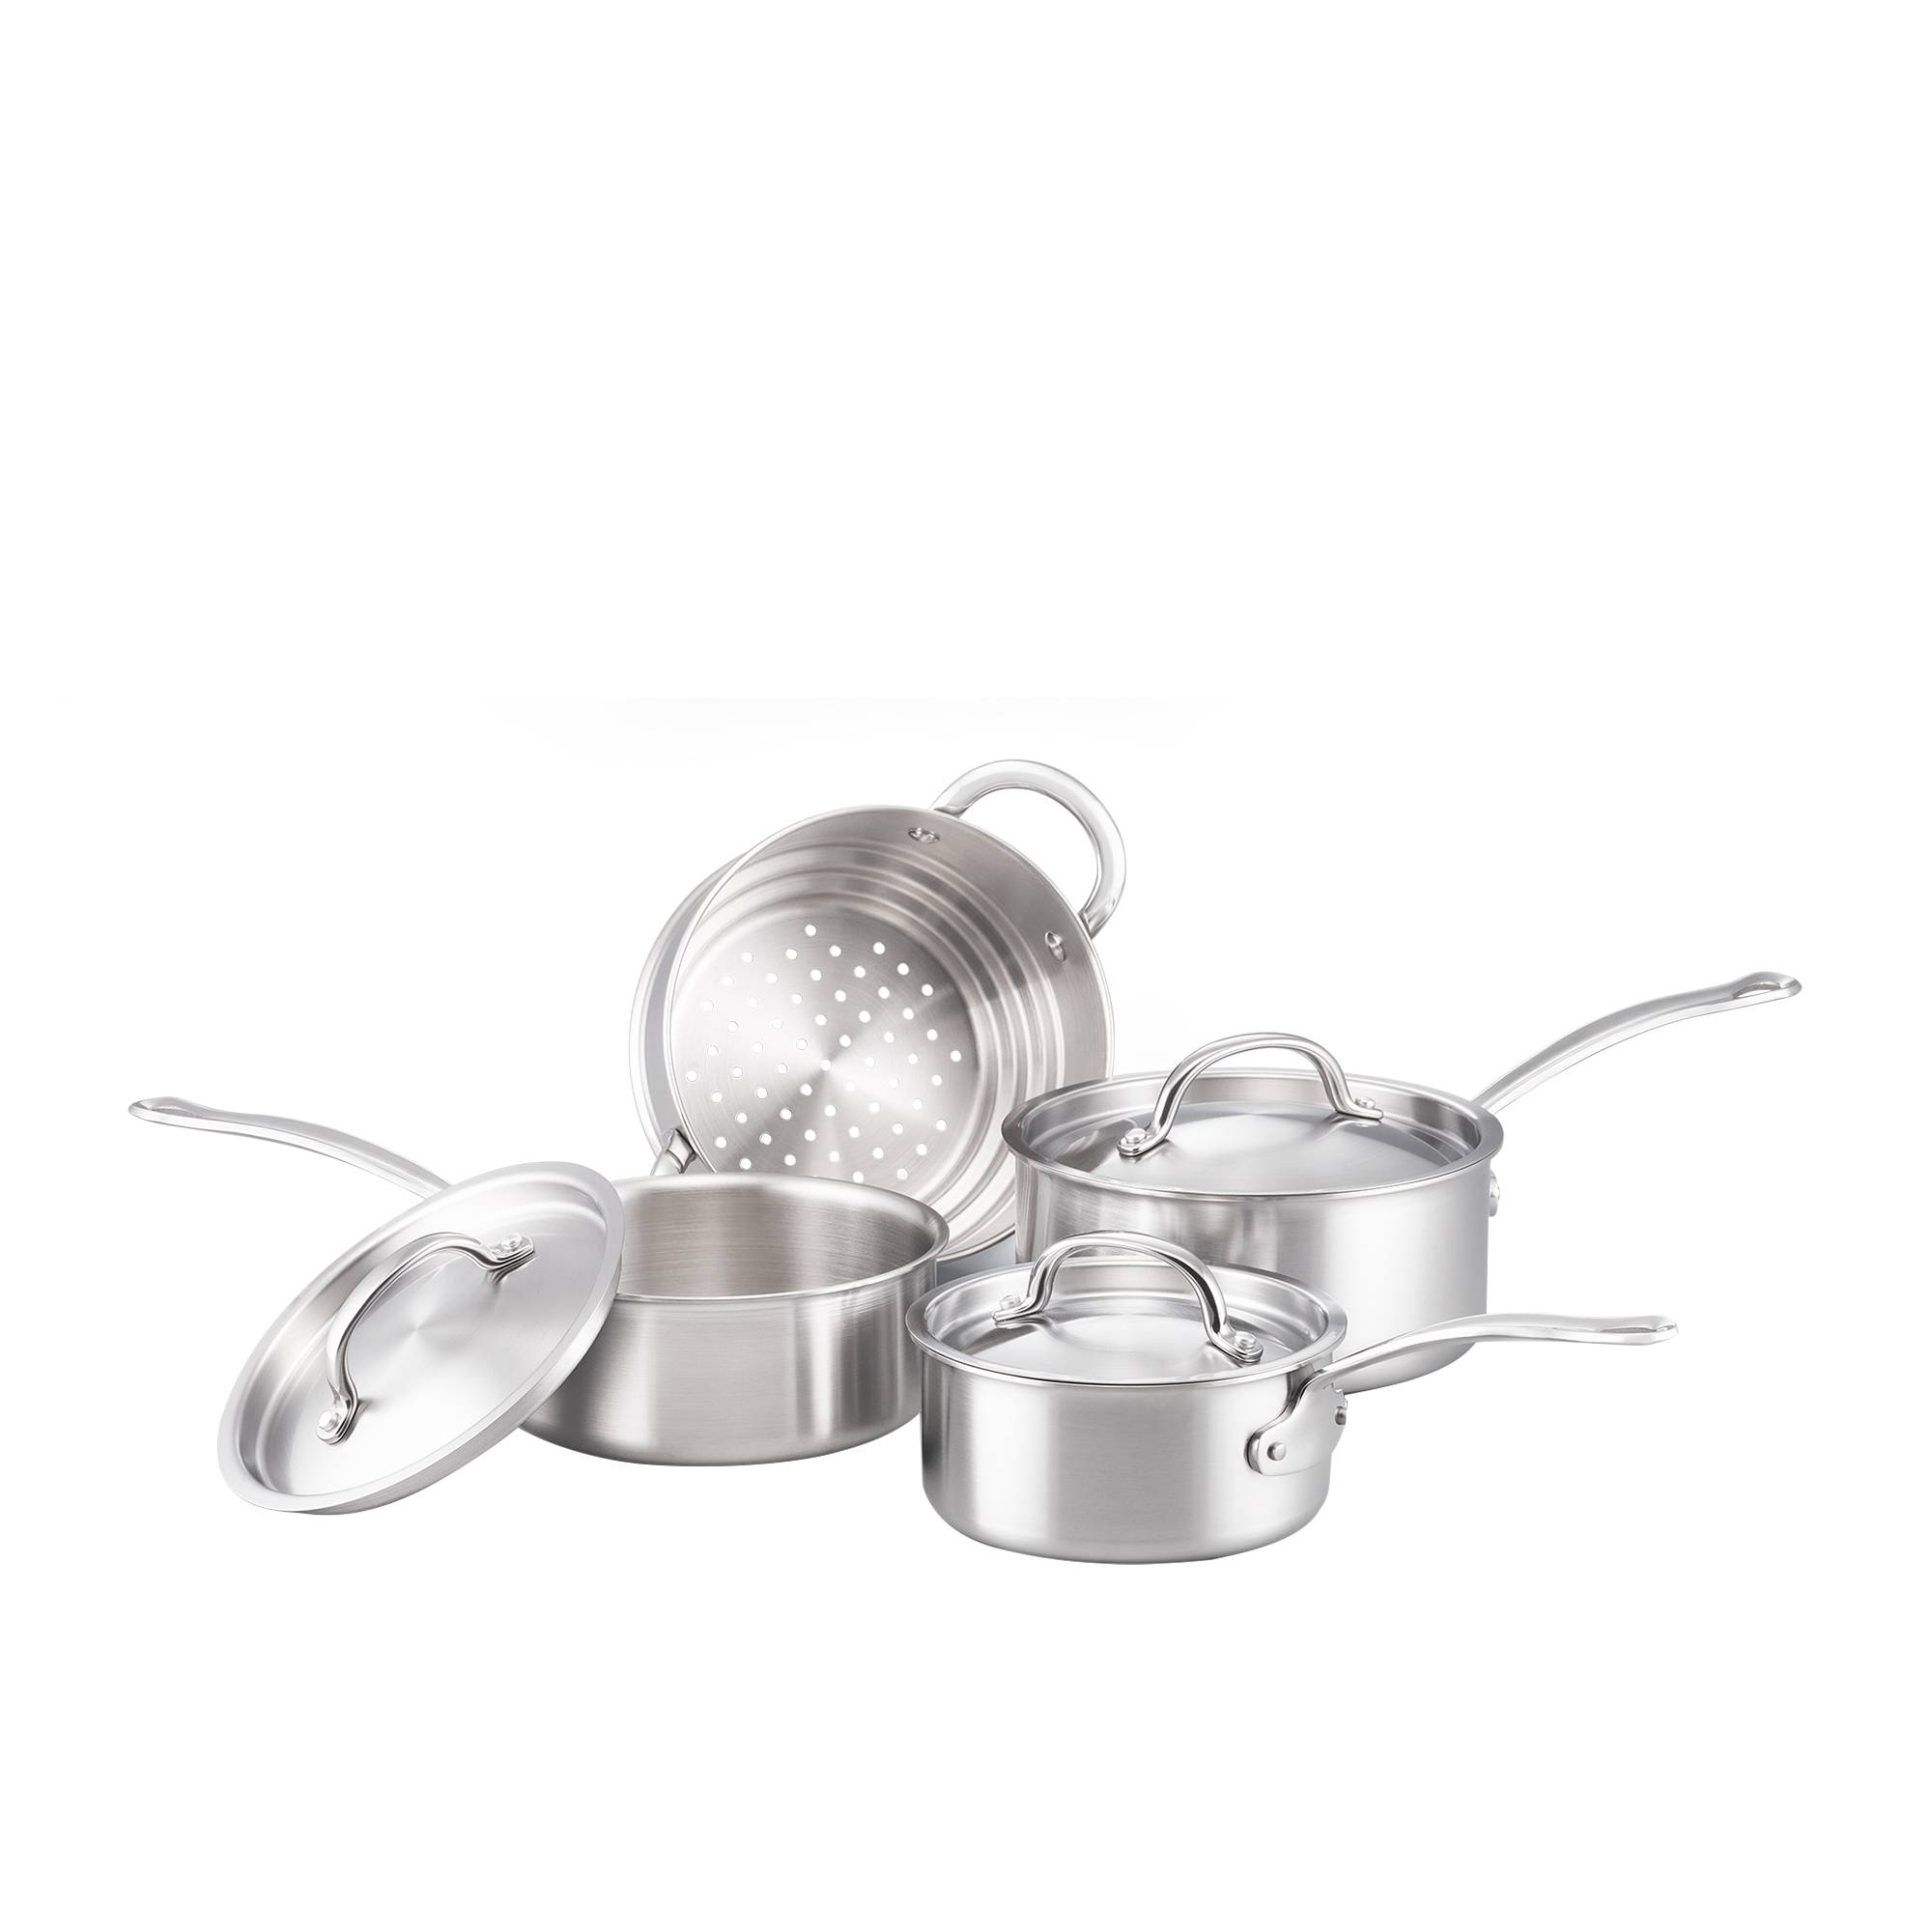 Essteele Per Amore 4pc Stainless Steel Cookware Set Image 1